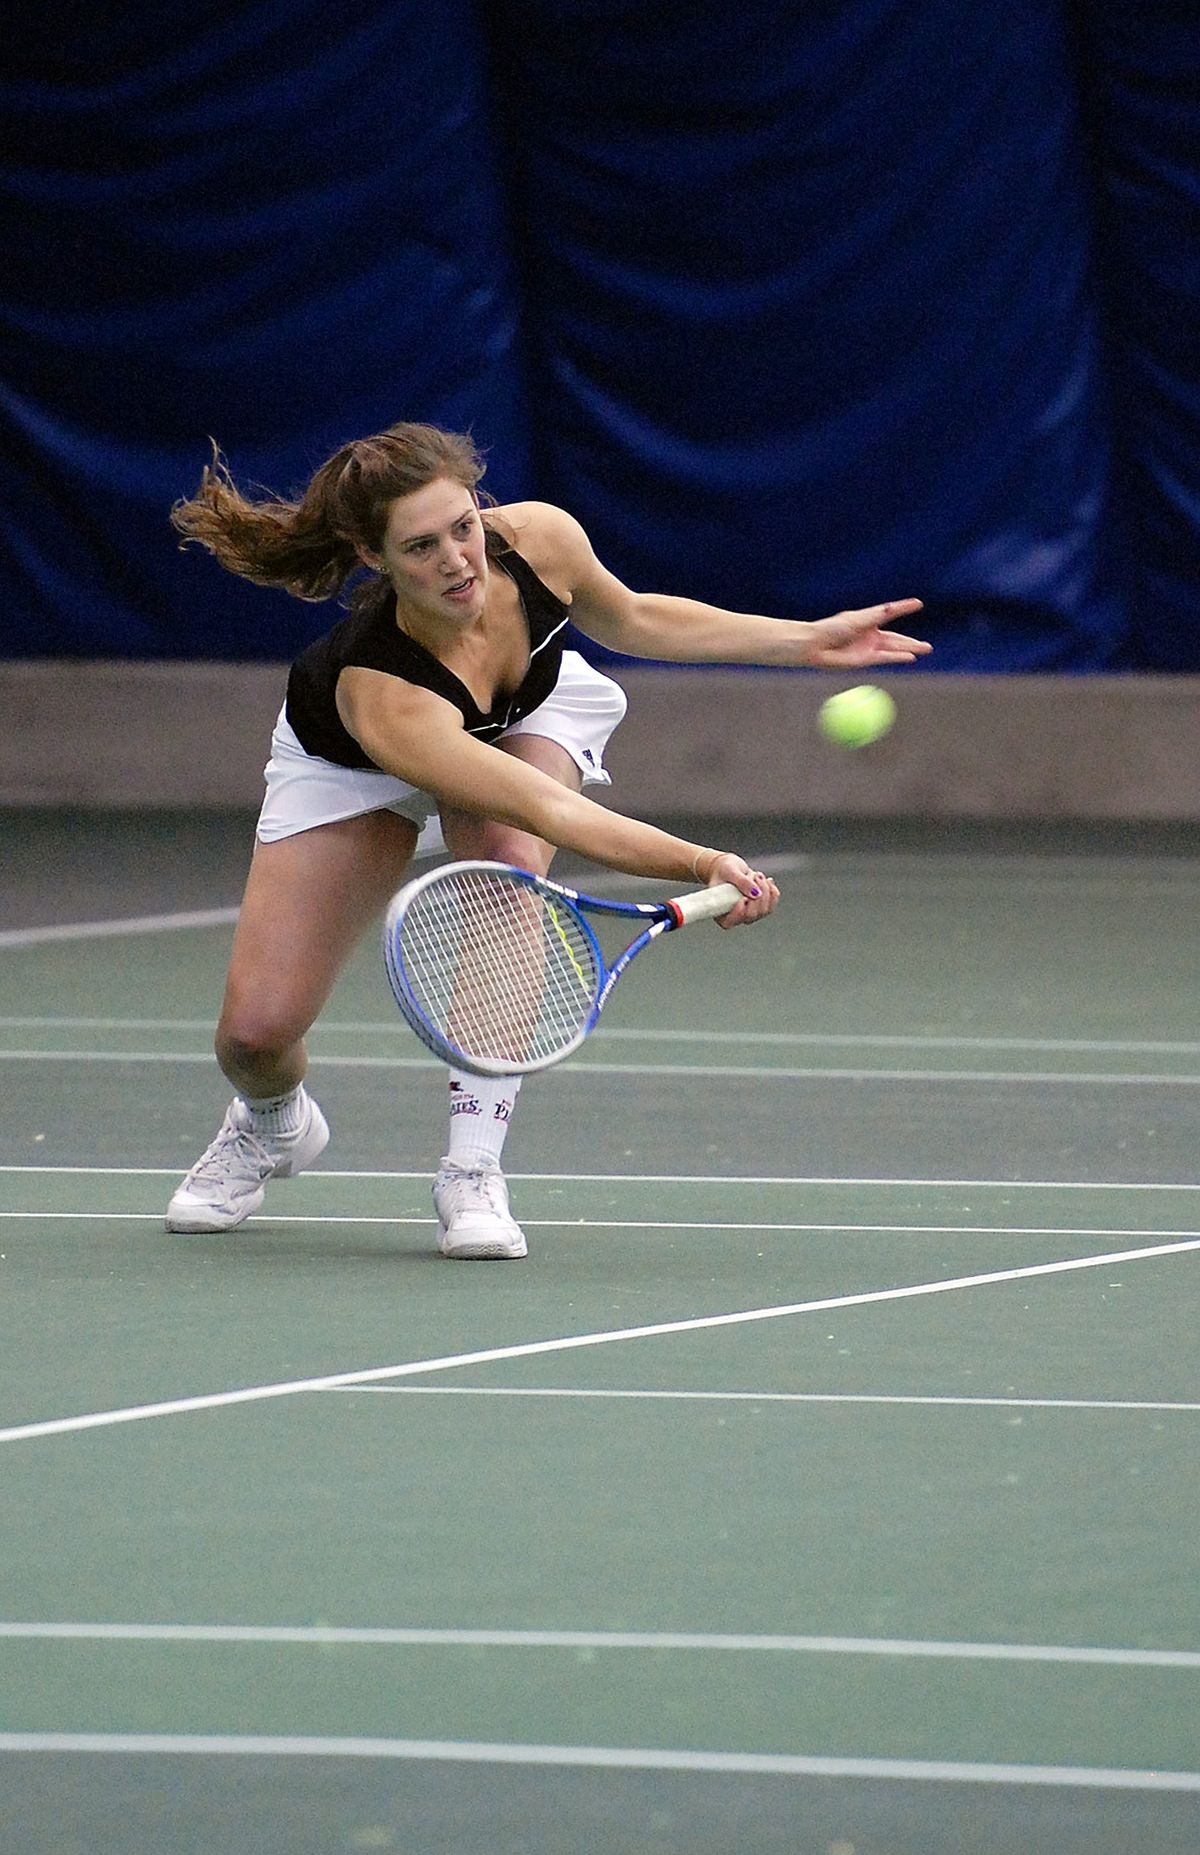 Whitworth tennis player Katie Staudinger will end her career with the most wins in school history.